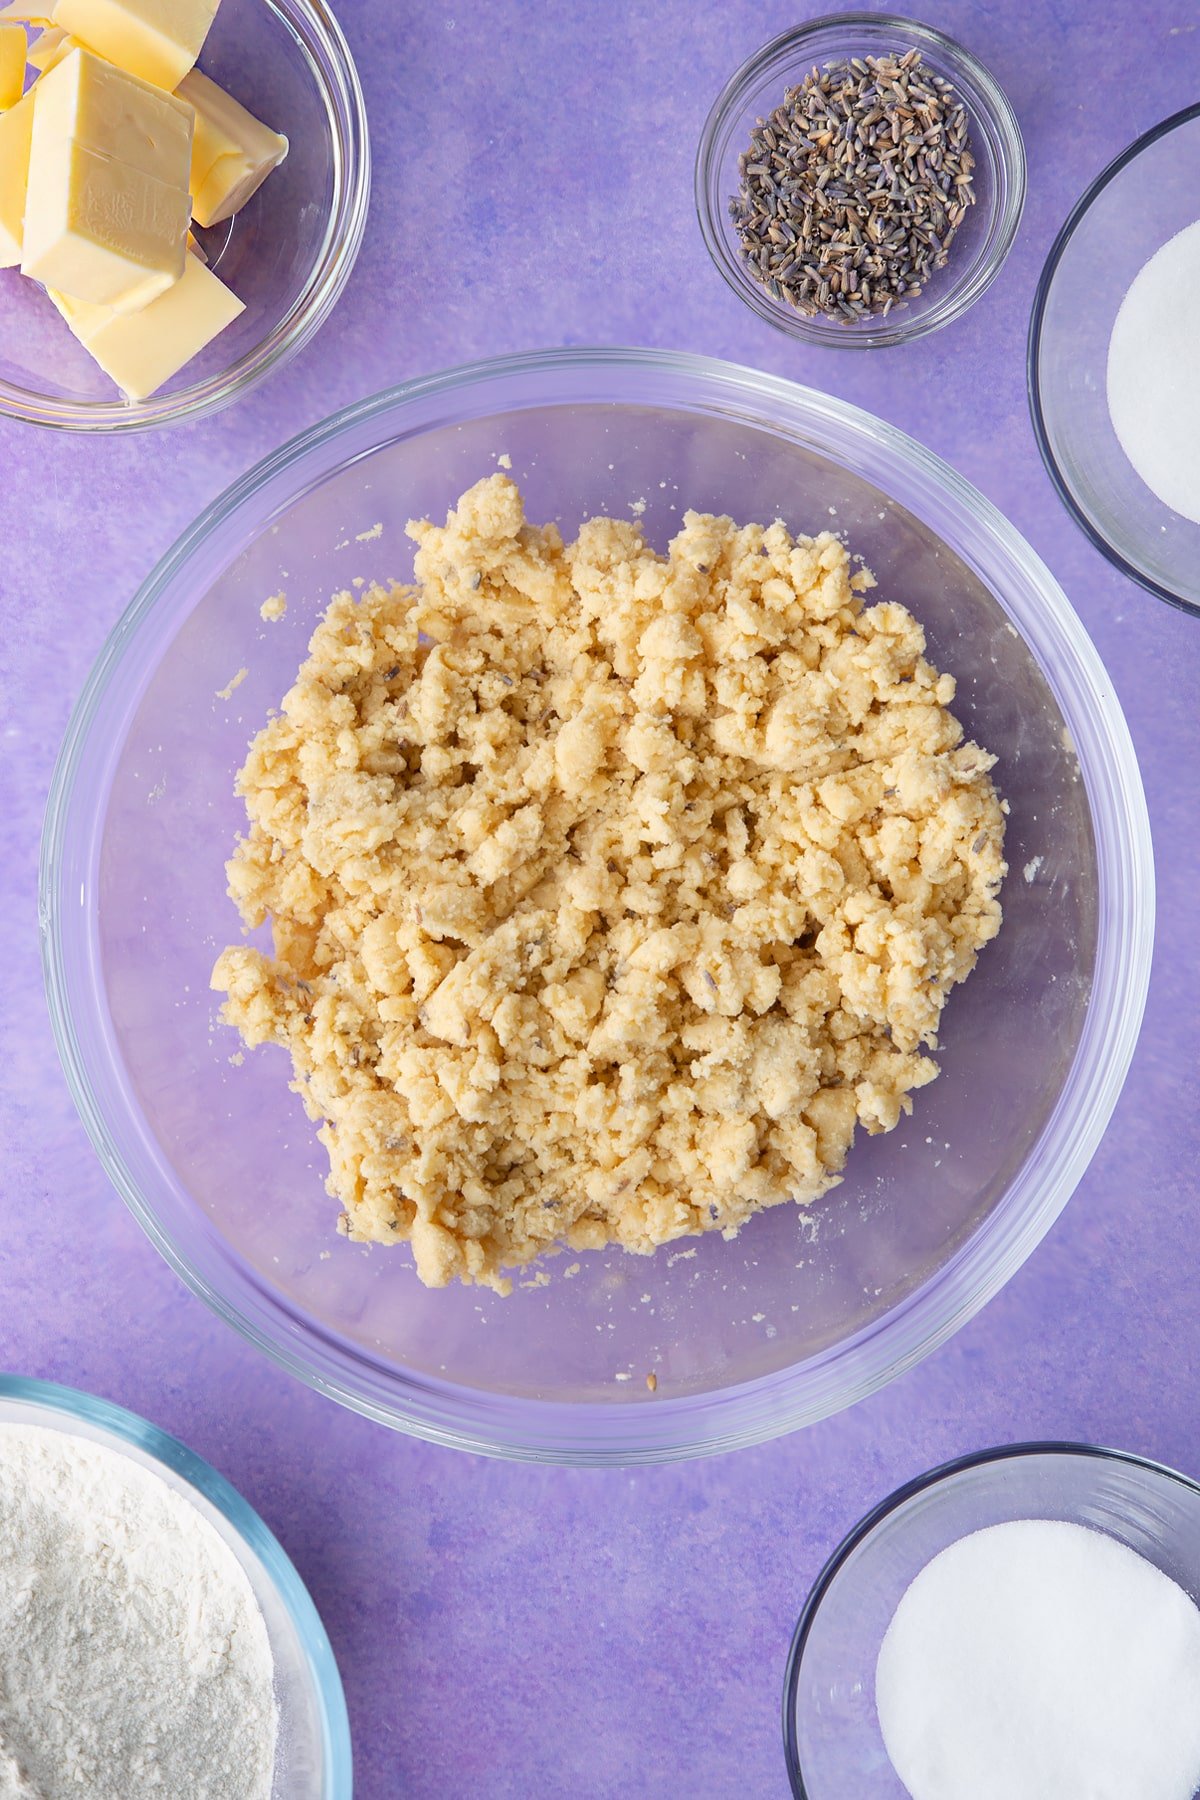 Lavender shortbread cookie dough in a mixing bowl.